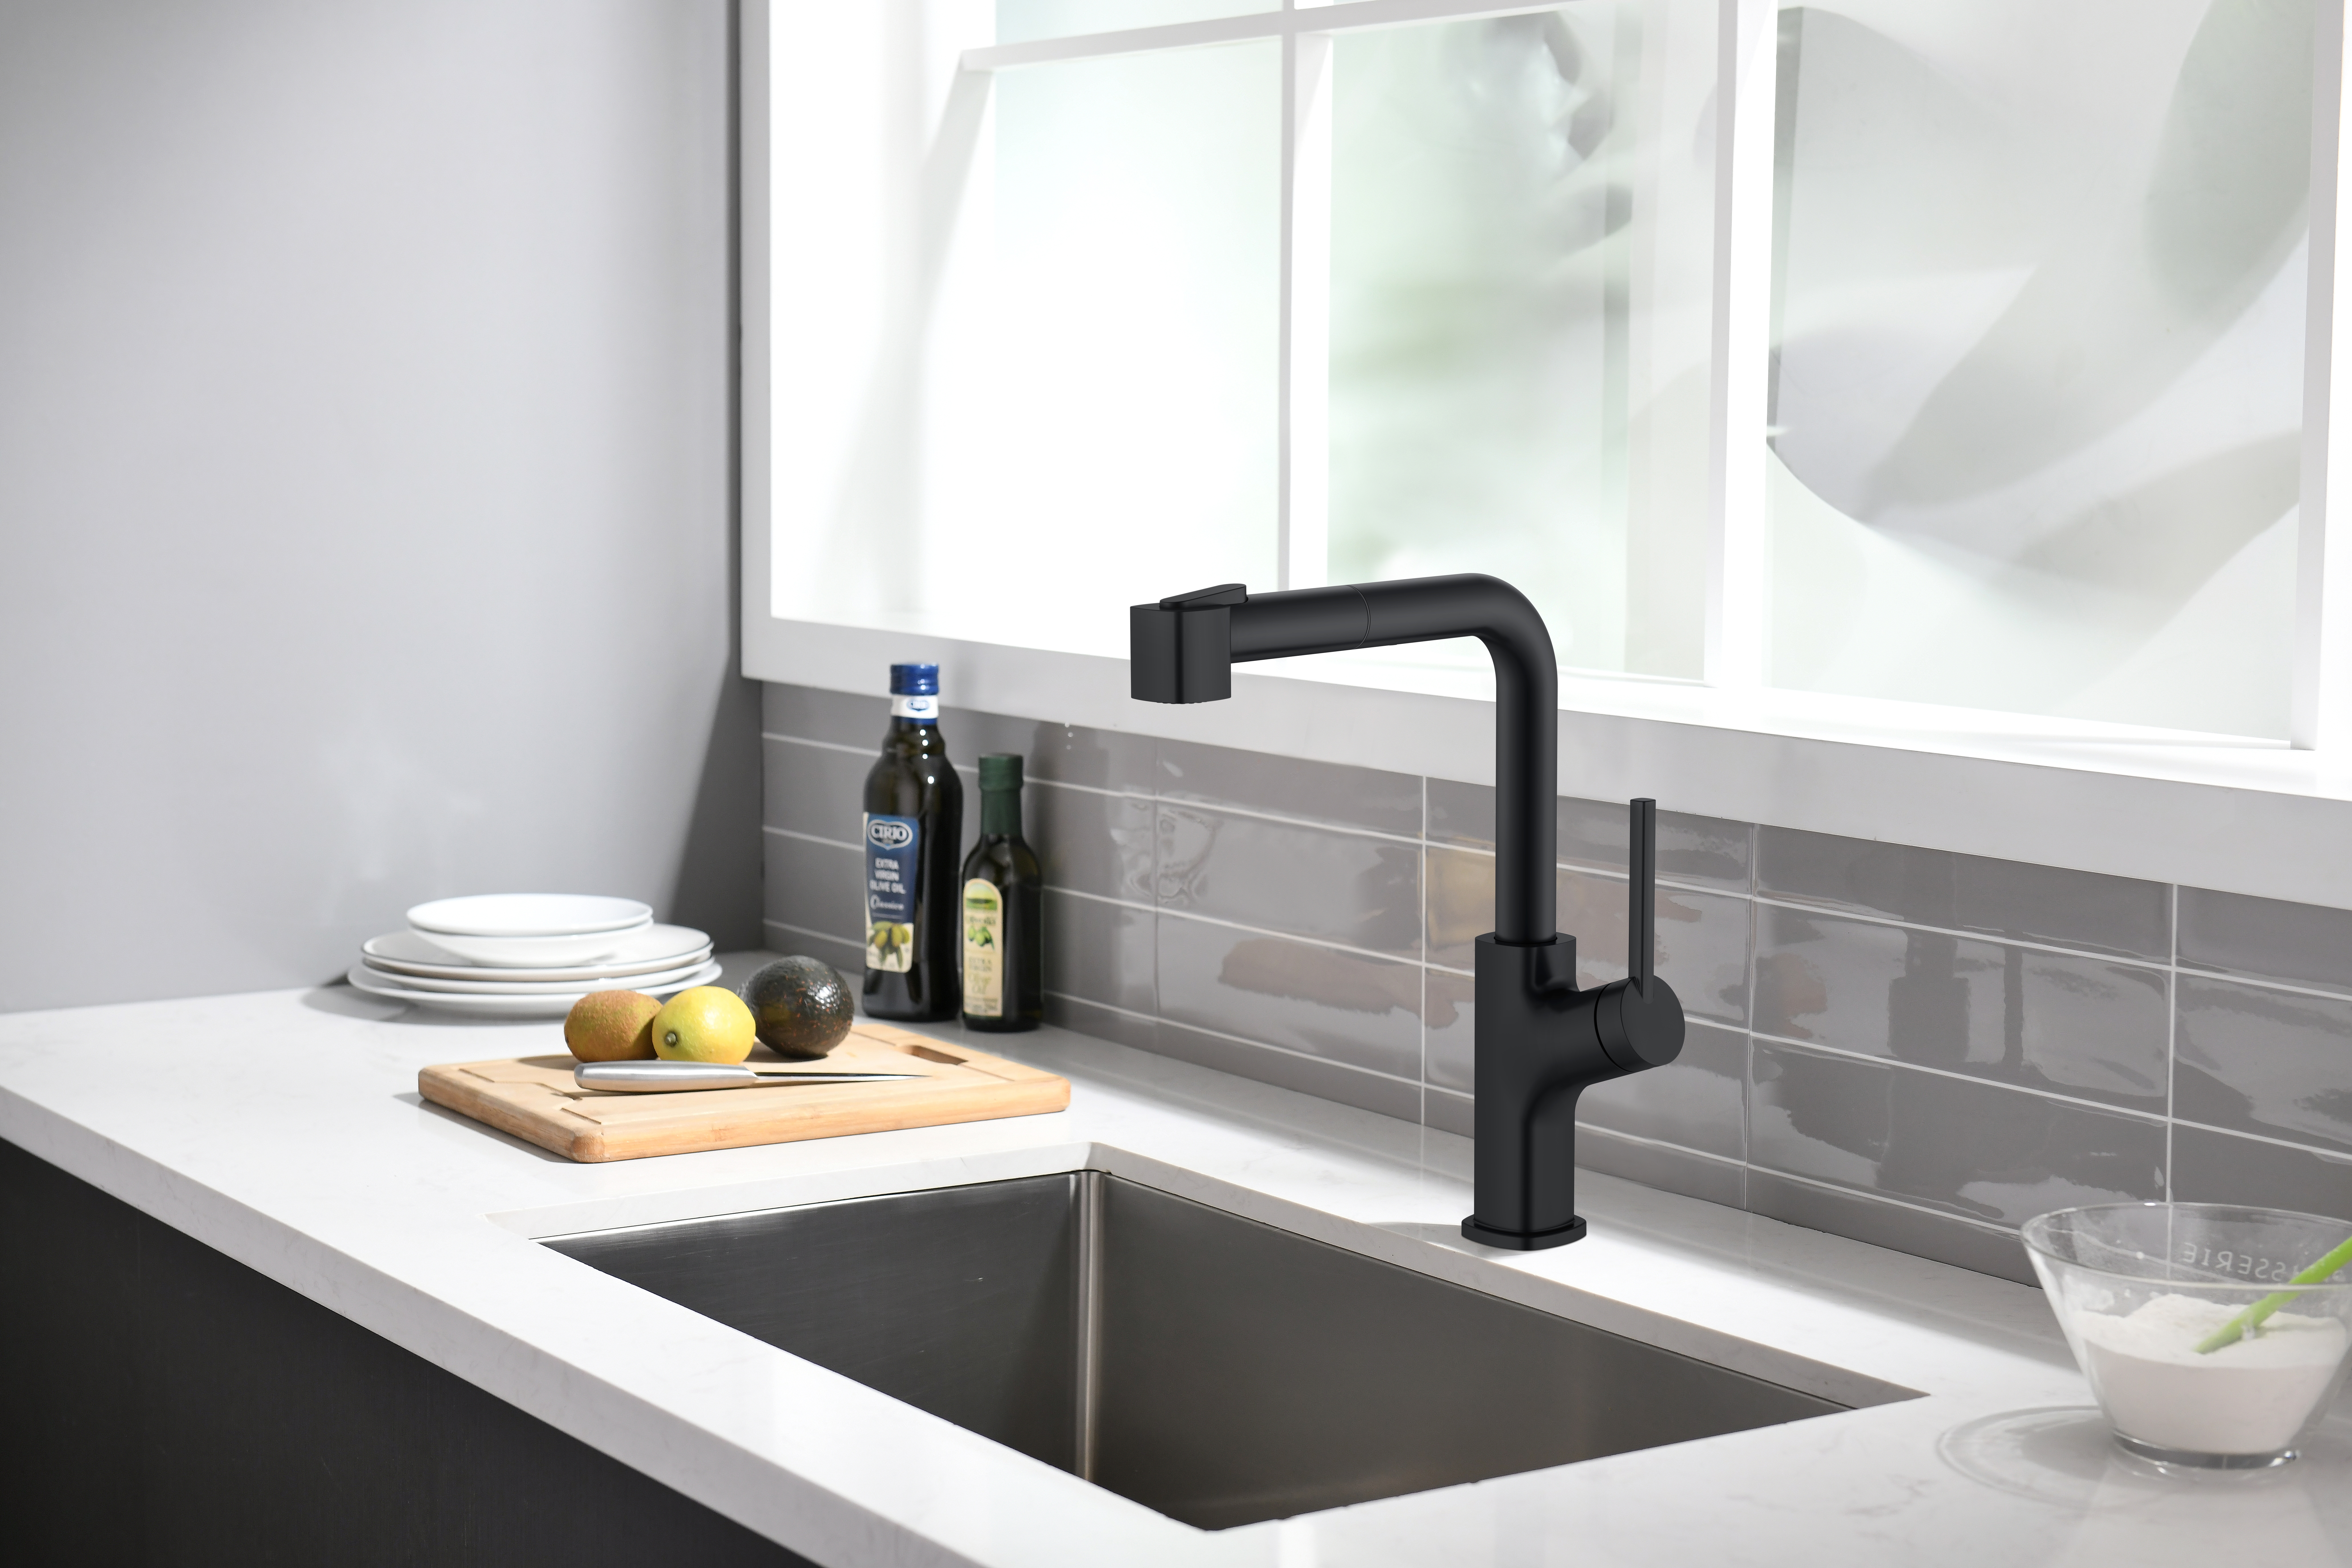 Considerations For a Gold/ Black Kitchen Faucet